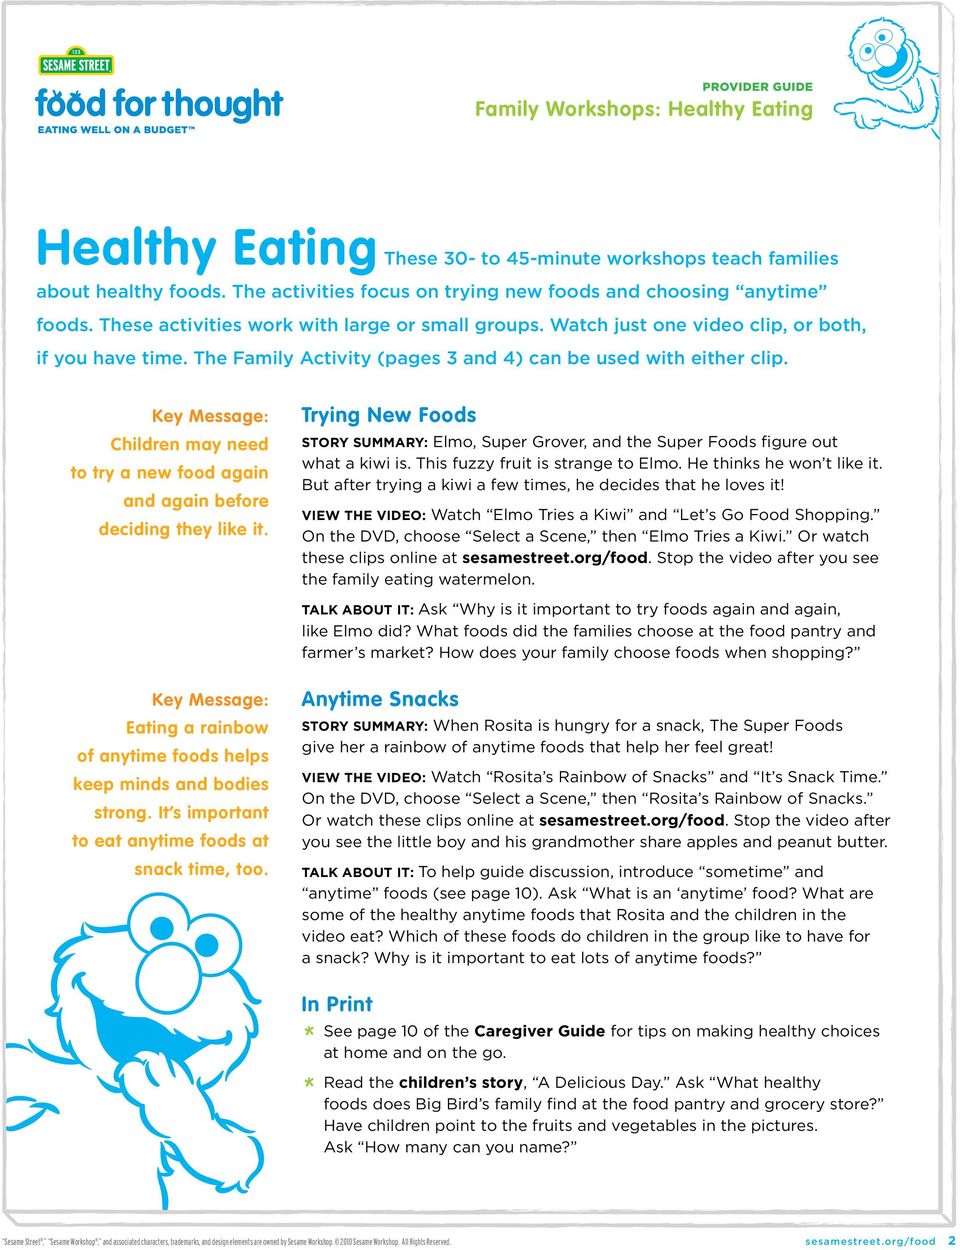 Key Message: Children may need to try a new food again and again before deciding they like it. Trying New Foods Story Summary: Elmo, Super Grover, and the Super Foods figure out what a kiwi is.